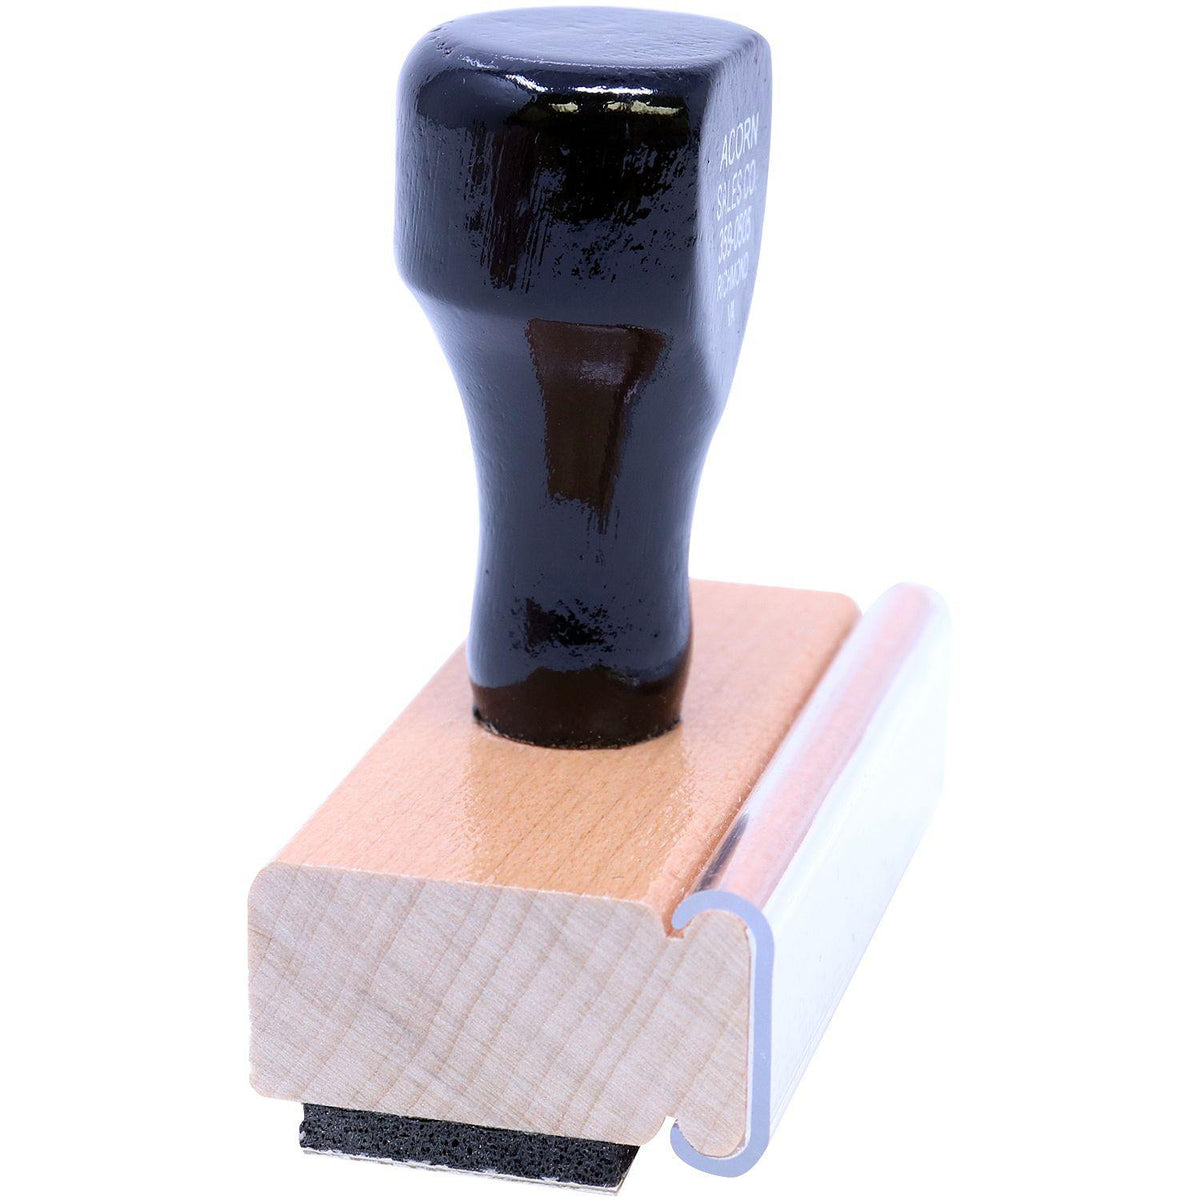 Please Correct Rubber Stamp - Engineer Seal Stamps - Brand_Acorn, Impression Size_Small, Stamp Type_Regular Stamp, Type of Use_Teacher